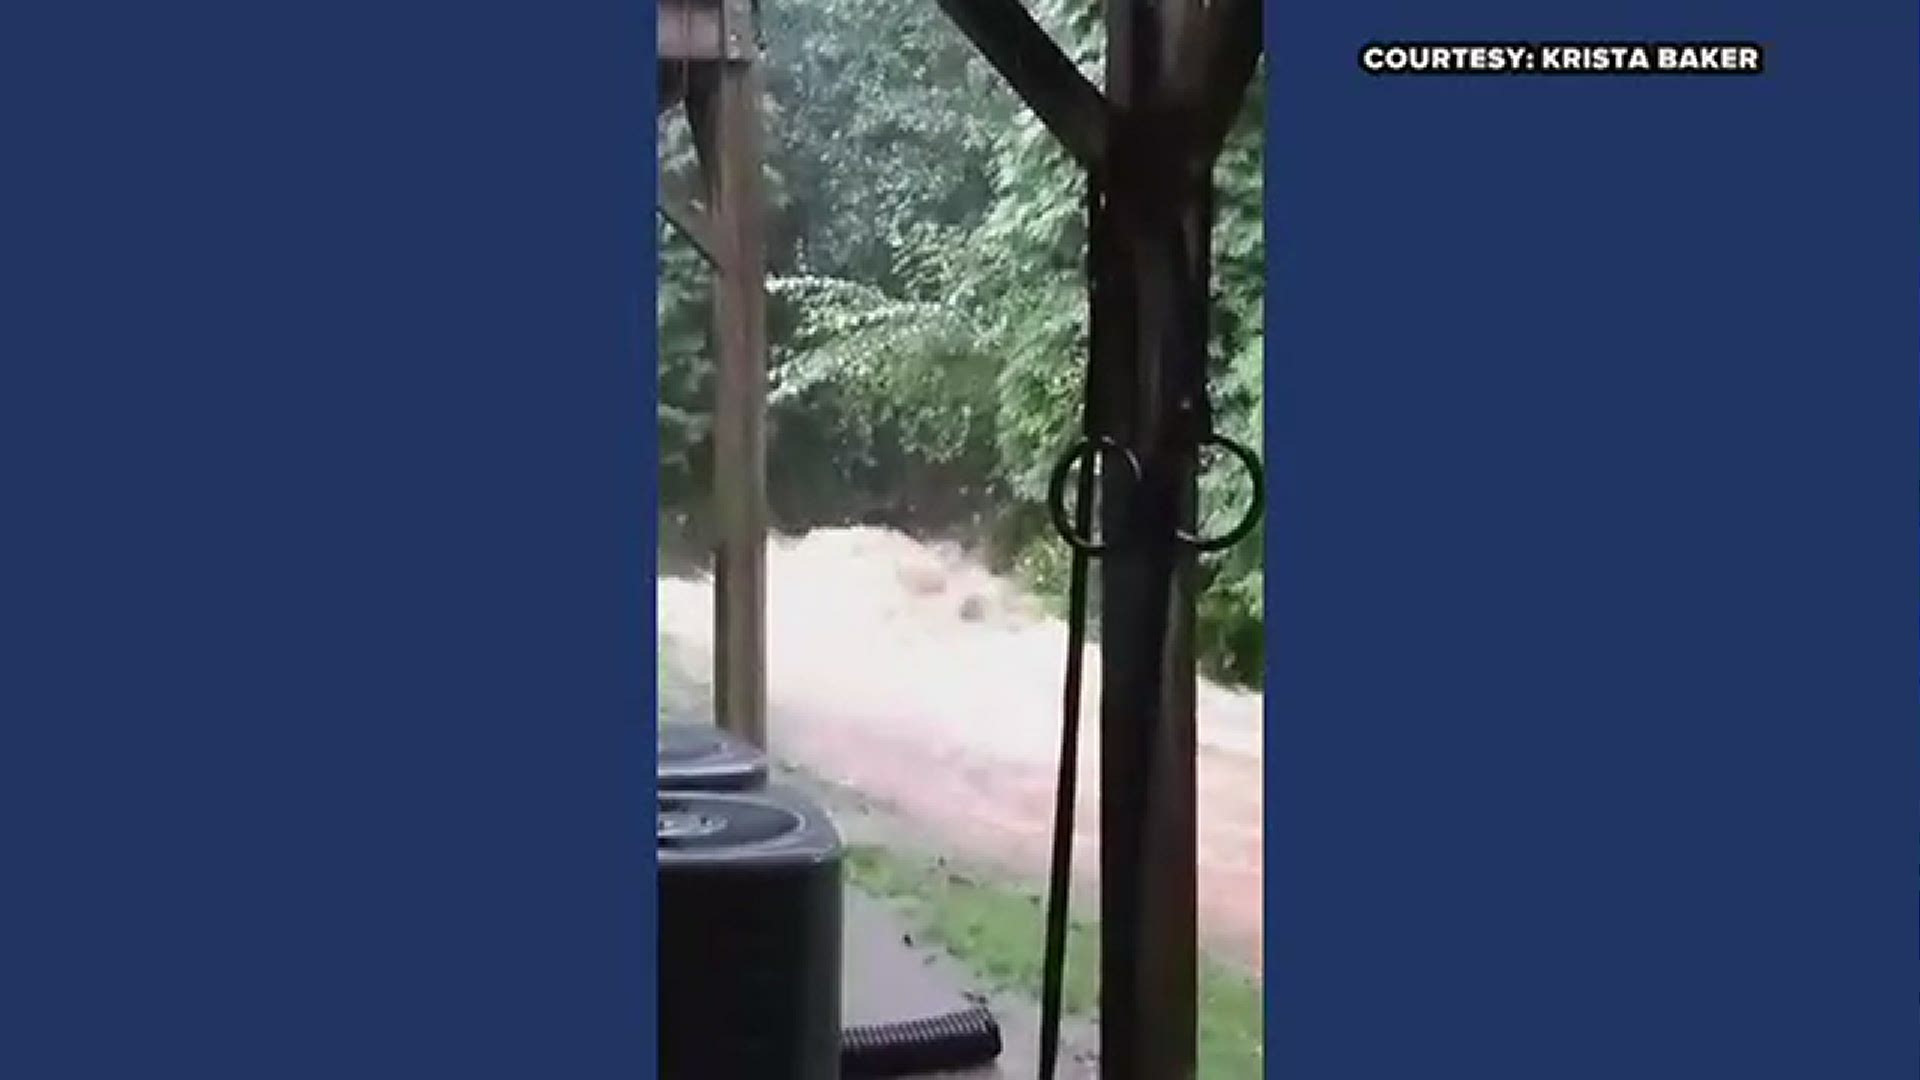 No, this is not a river but it sure does look like one! Krista Baker captured the video from her backyard in Winston-Salem.